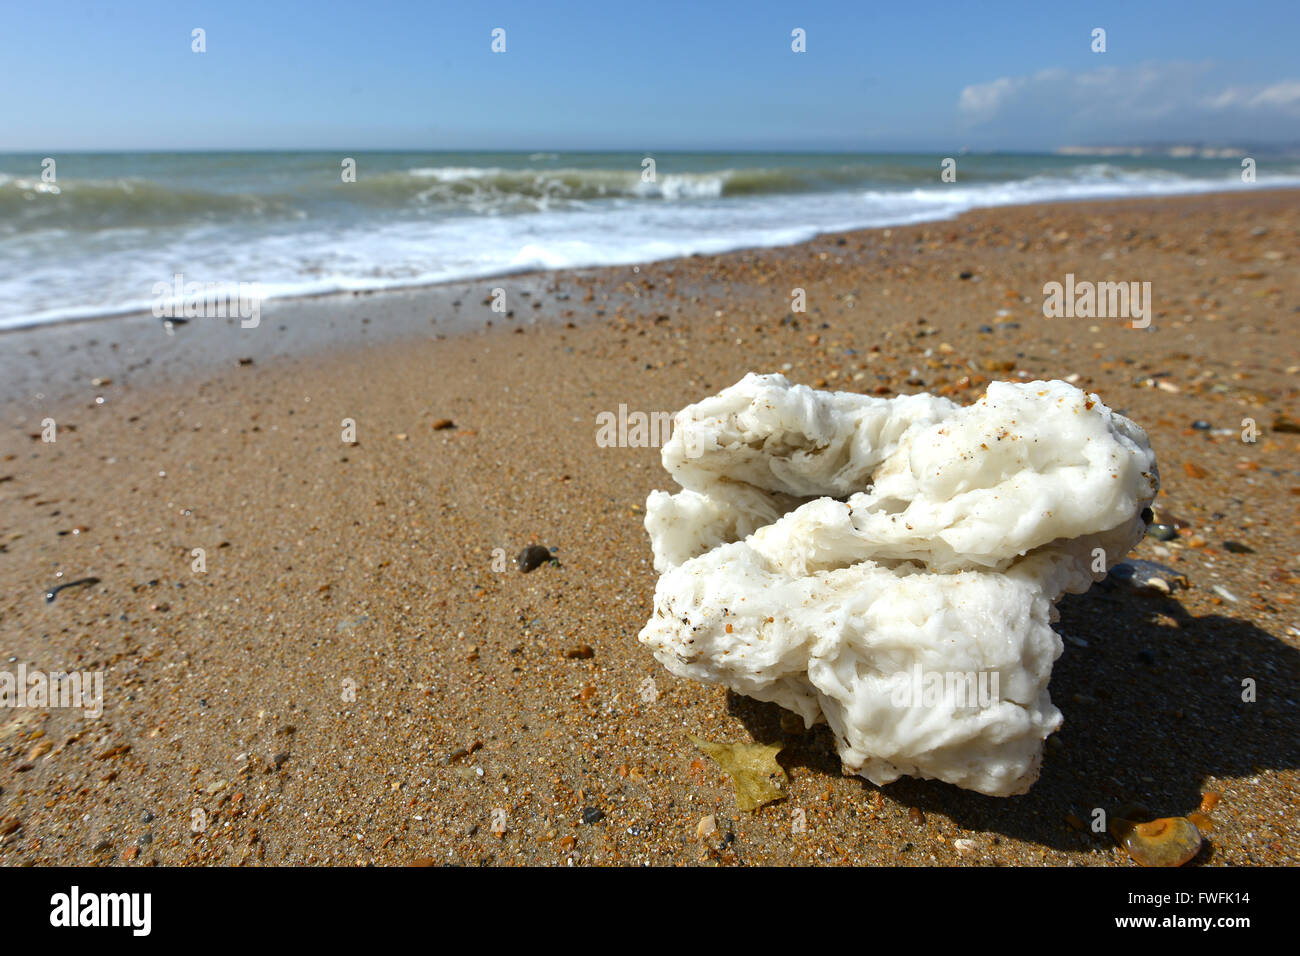 Palm oil of 'fatbergs' washed up on UK beach. Seaford, UK Stock Photo